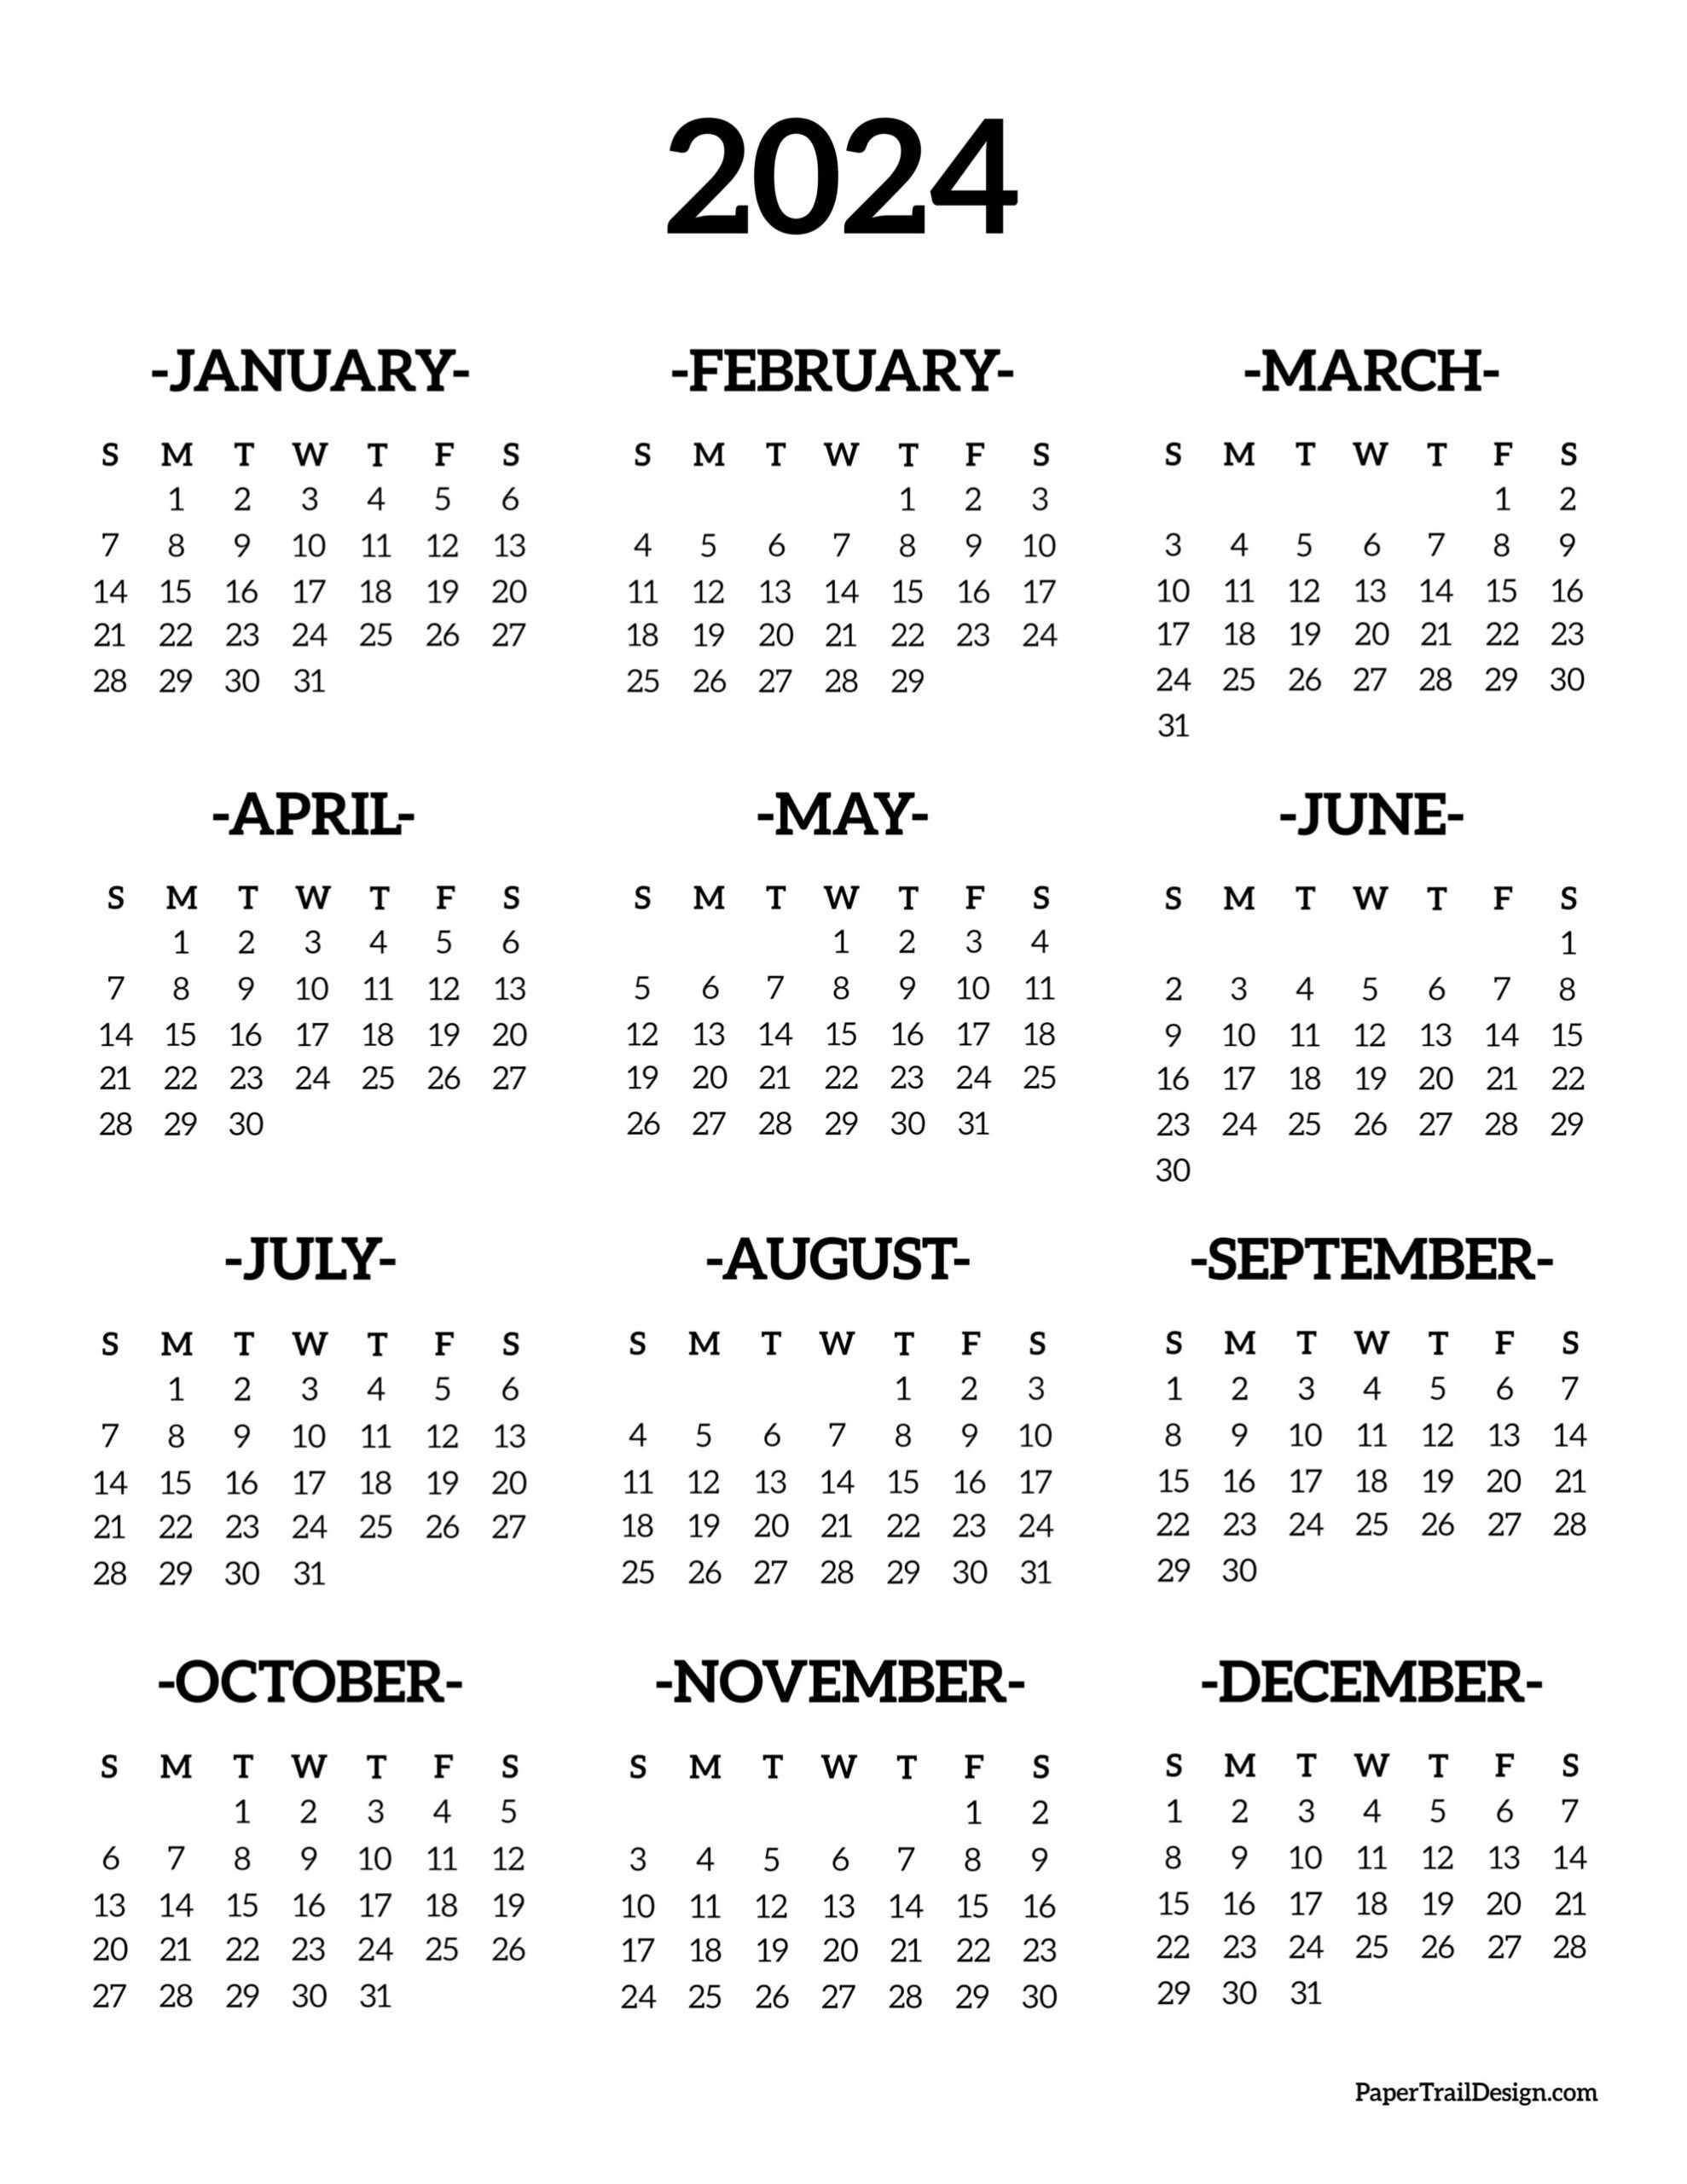 Calendar 2024 Printable One Page - Paper Trail Design | Printable Calendar 2024 One Page Pdf